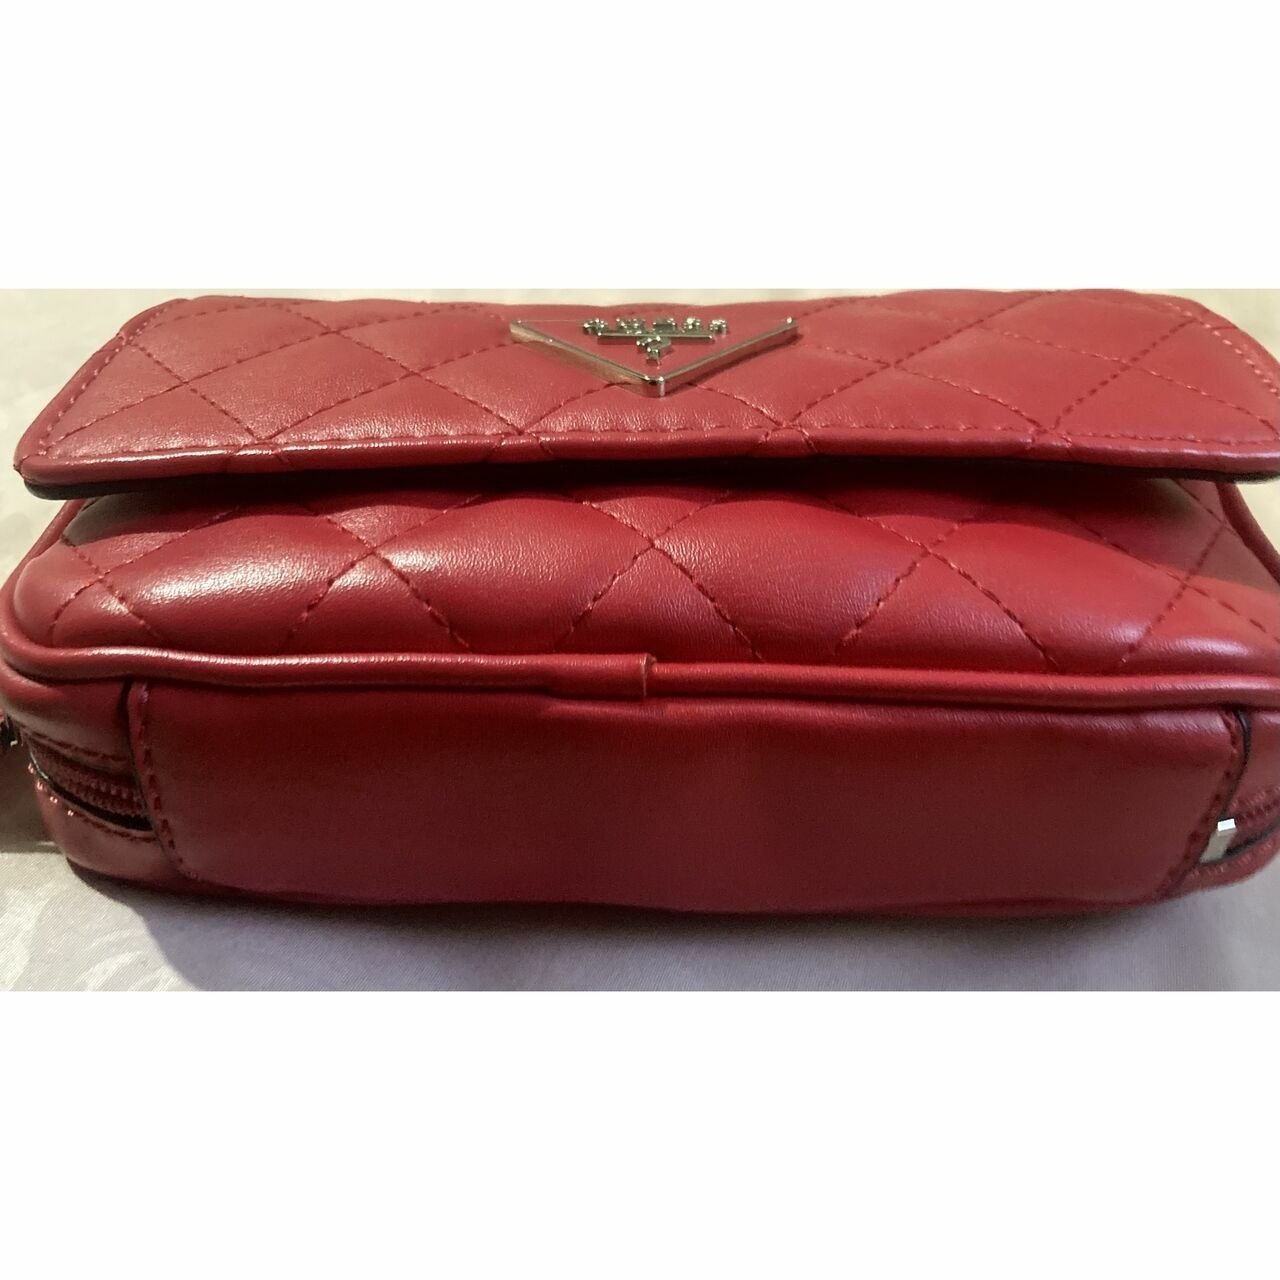 Guess Red Sling Bag